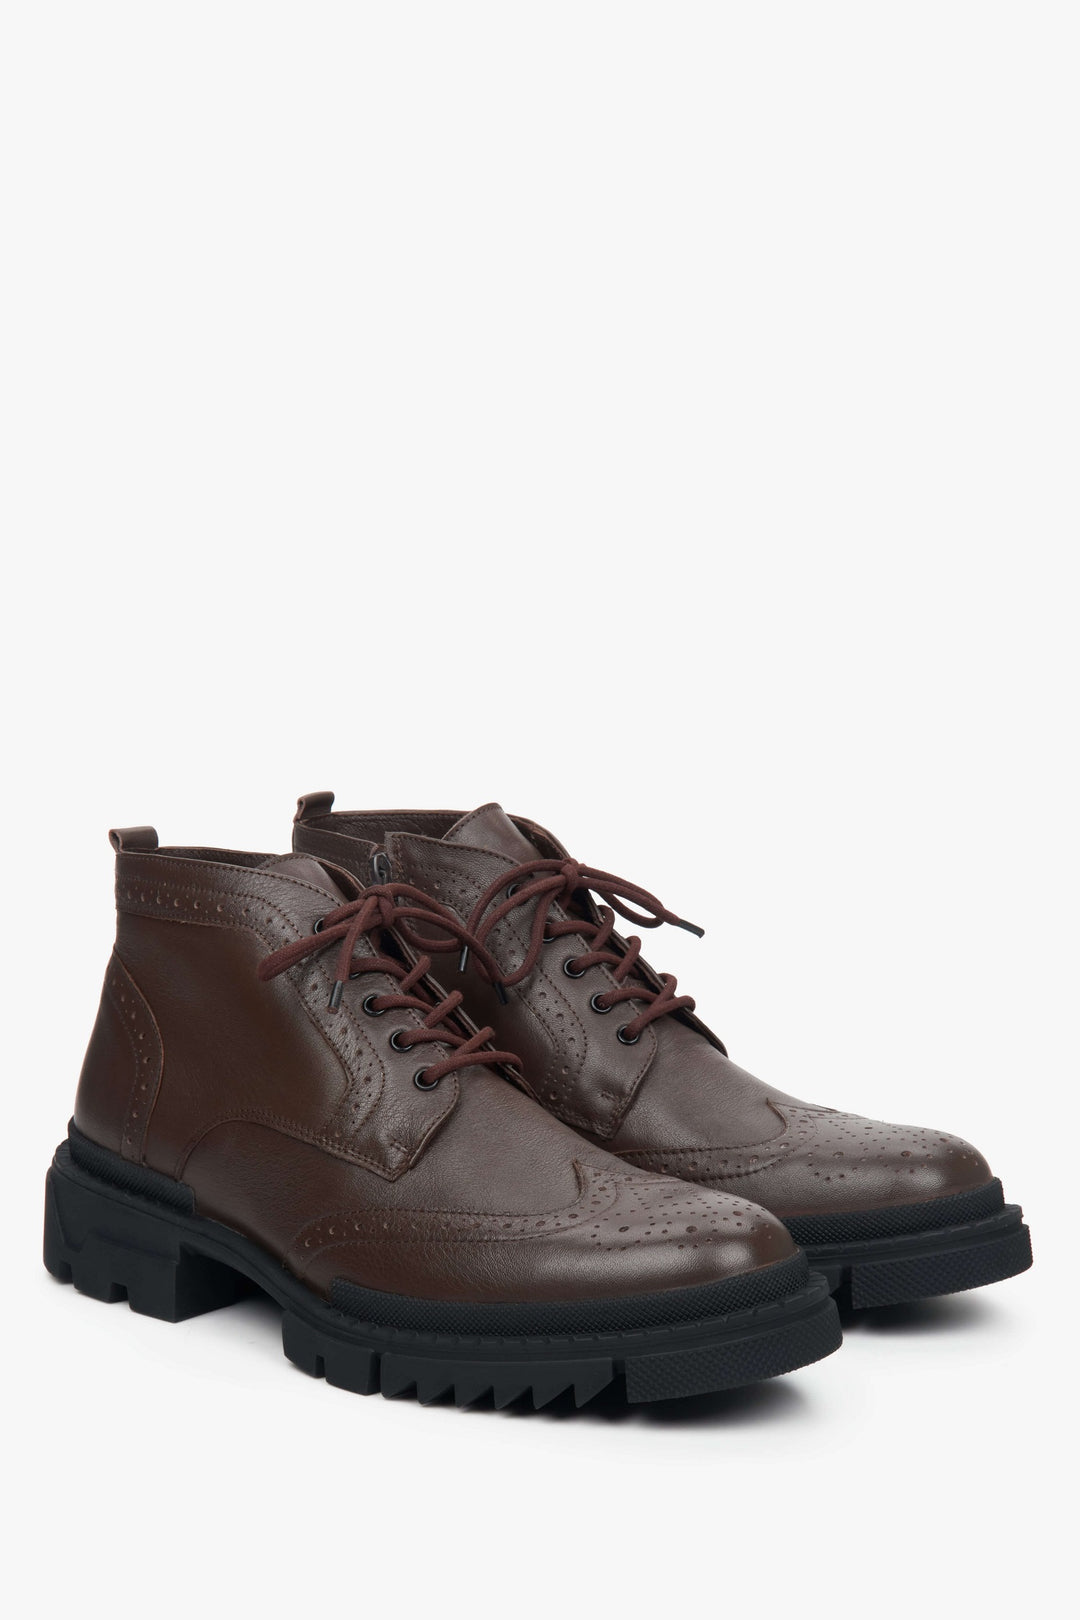 Men's Brown Boots made of Genuine Leather Estro ER00111991.